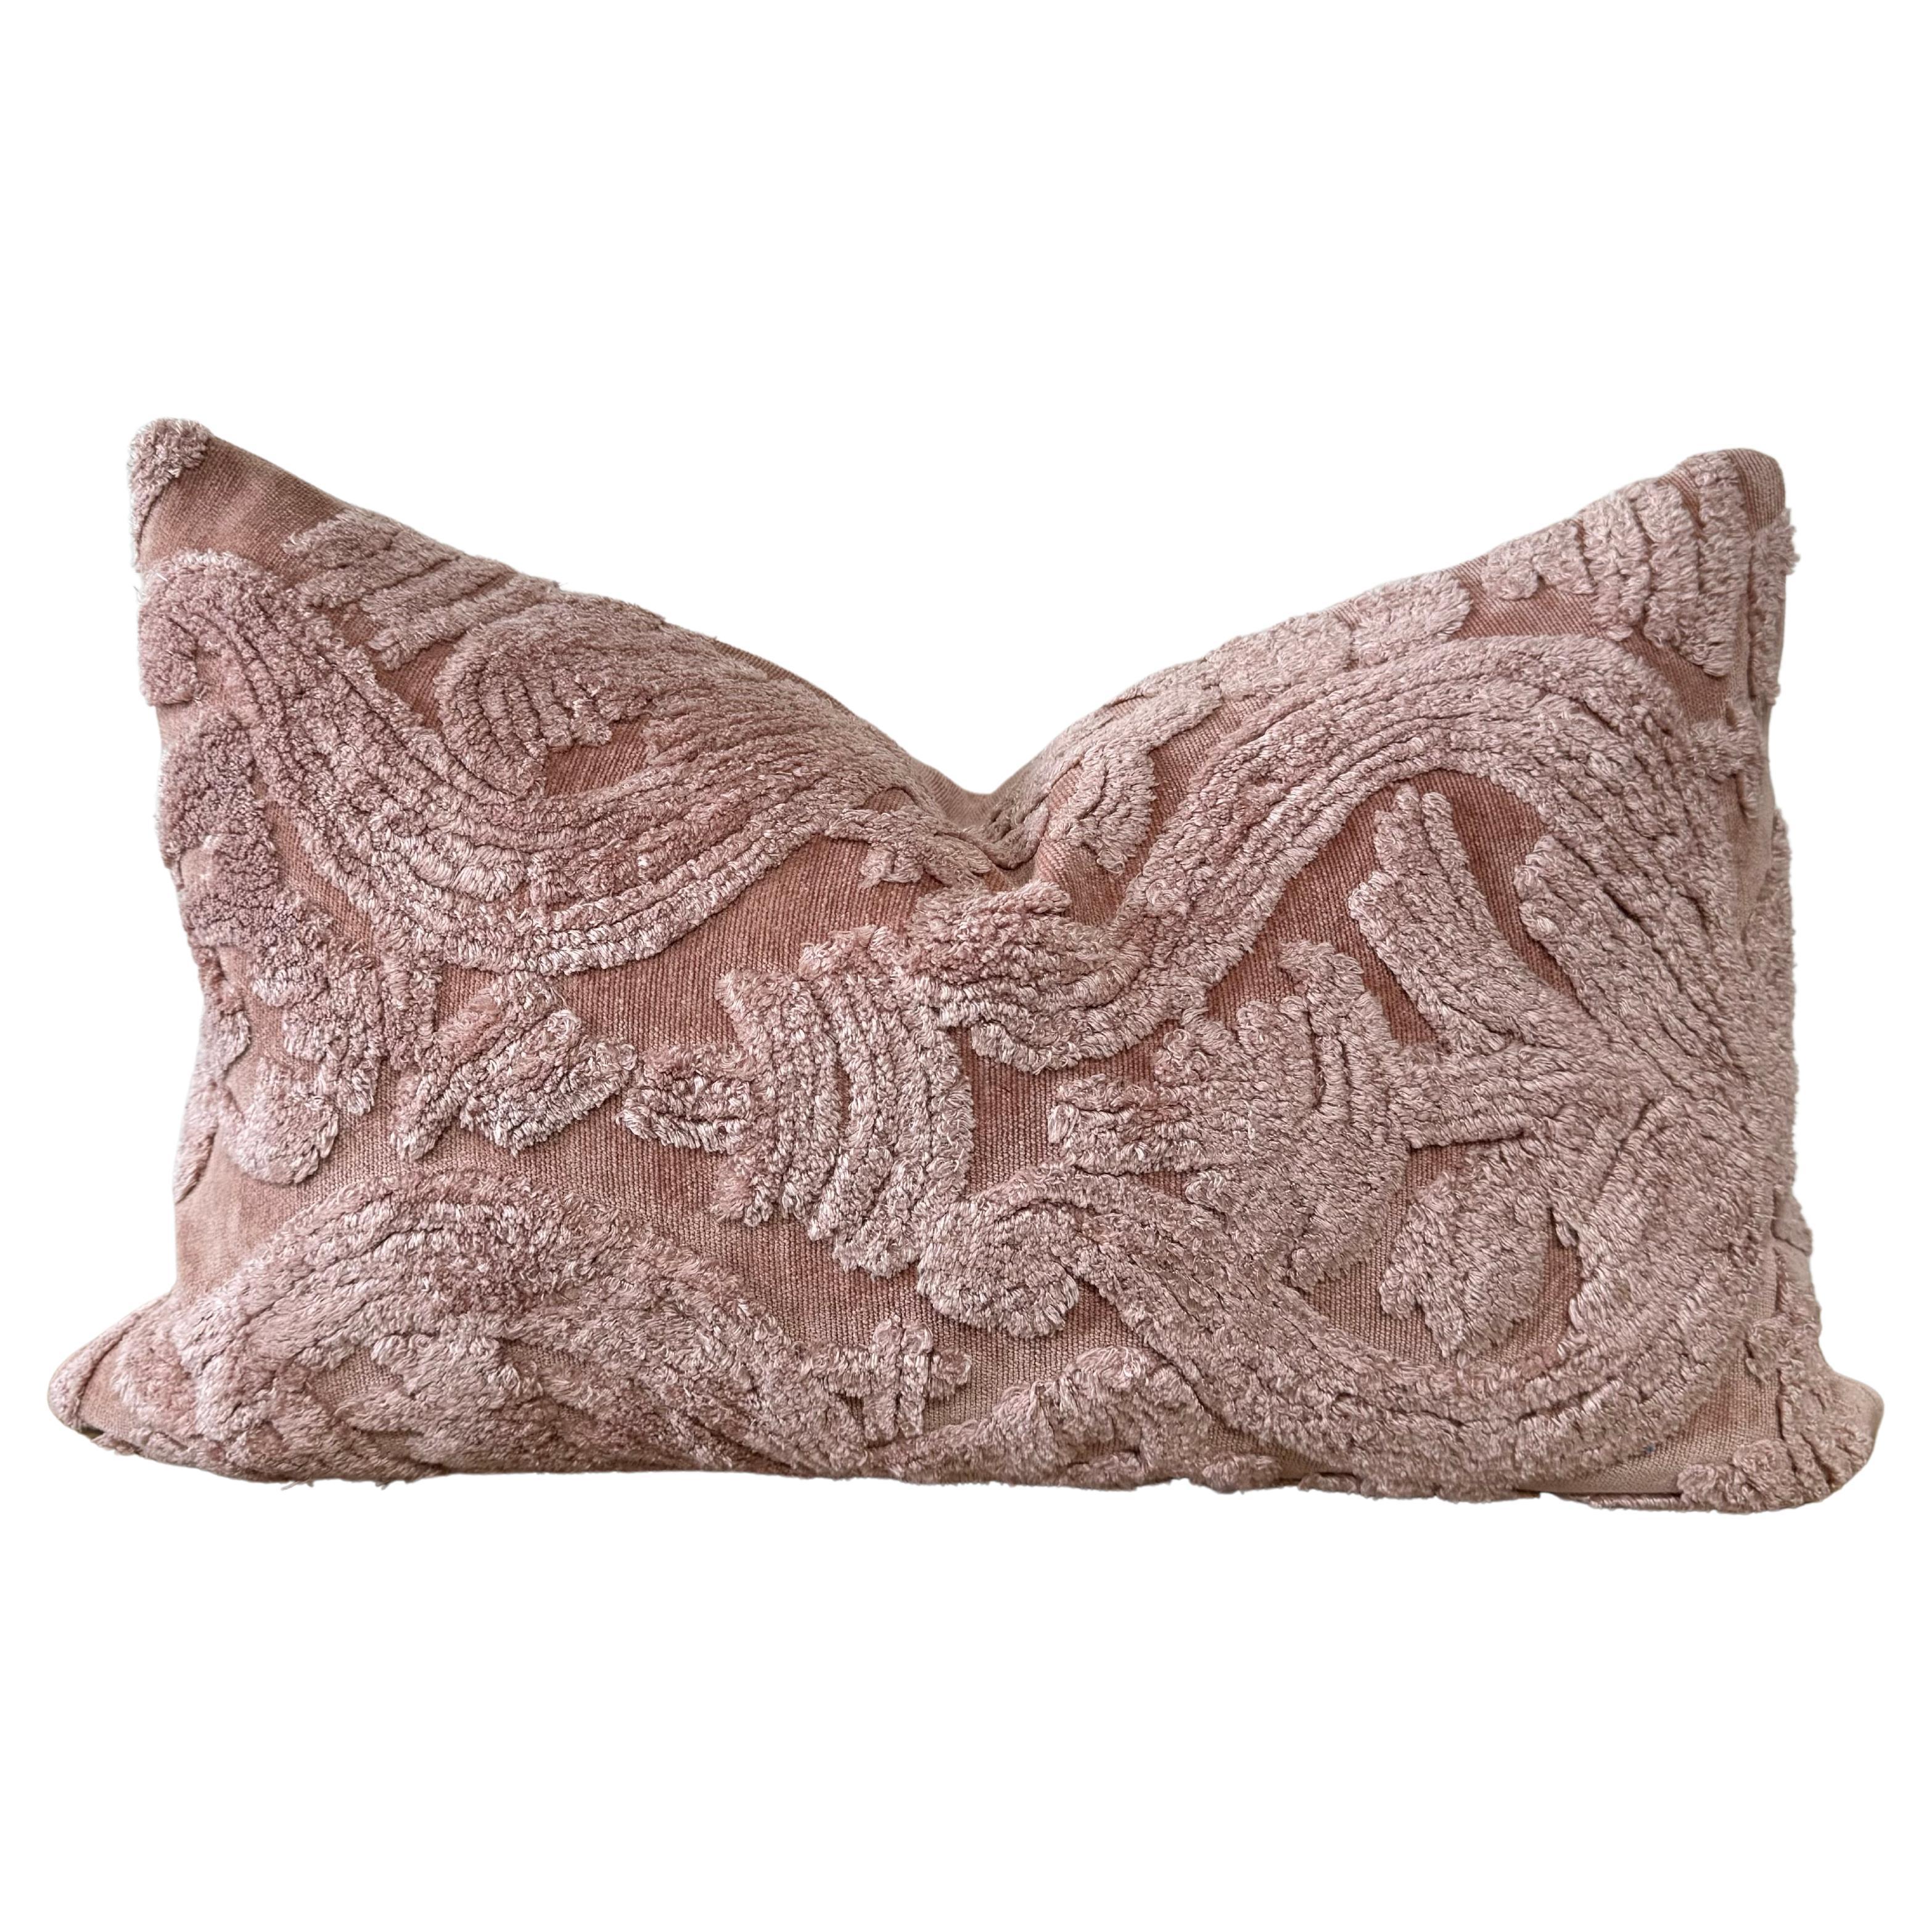 Vintage Inspired Chenille Style Lumbar Pillow in Blush Rose